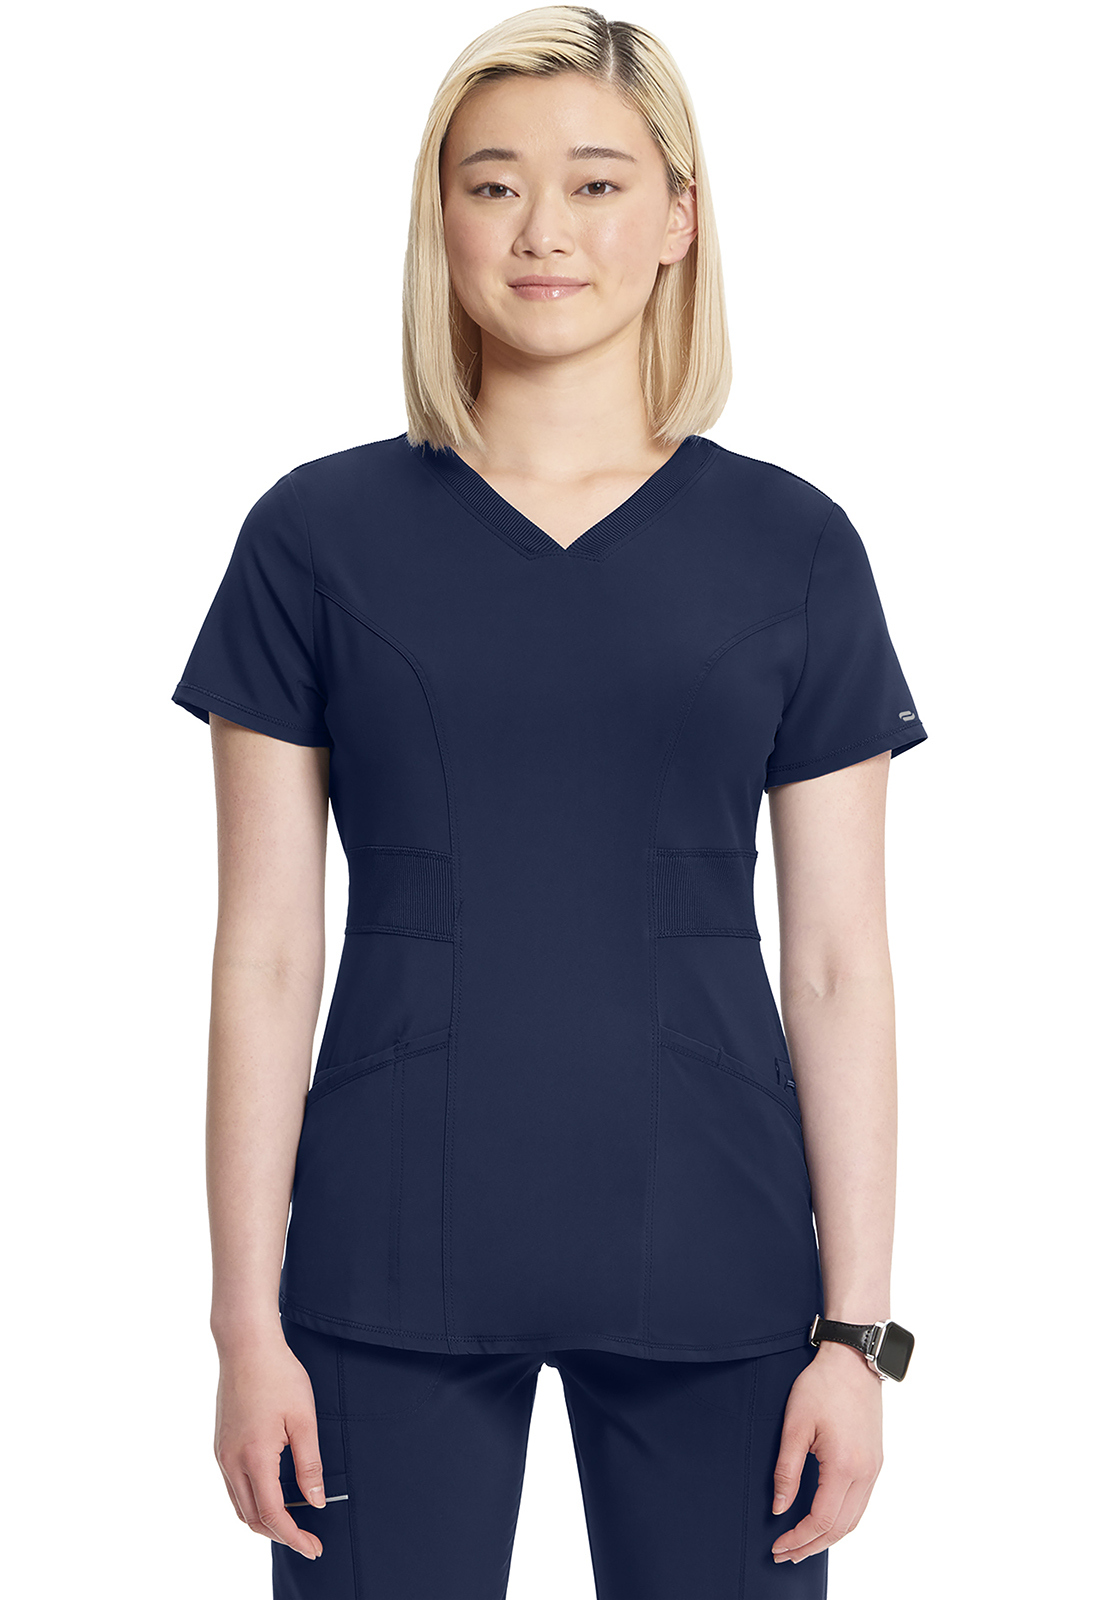 Today's Outfit of the Day features Infinity Scrubs by Cherokee